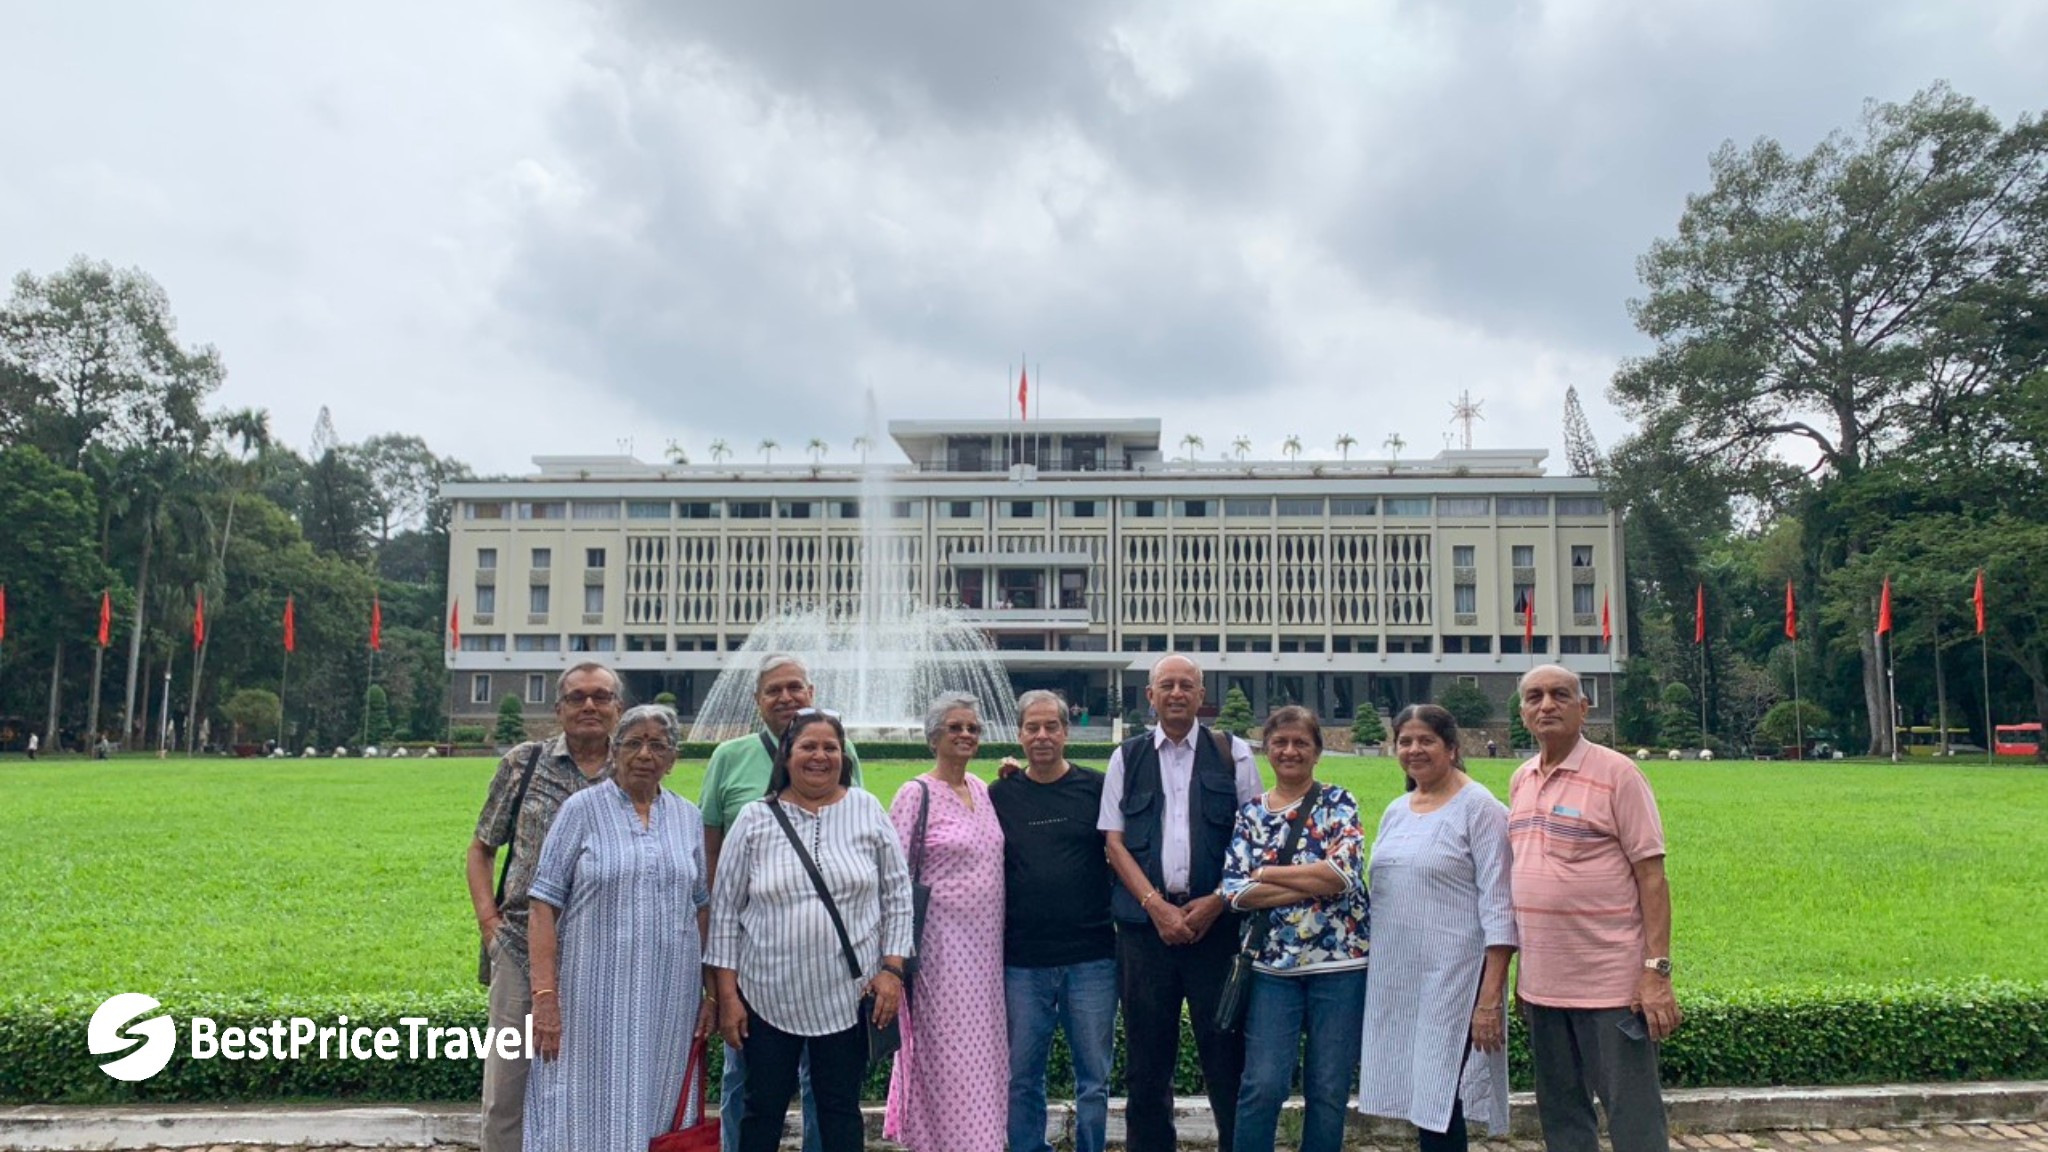 Day 11 Check In Front Of The Reunification Palace